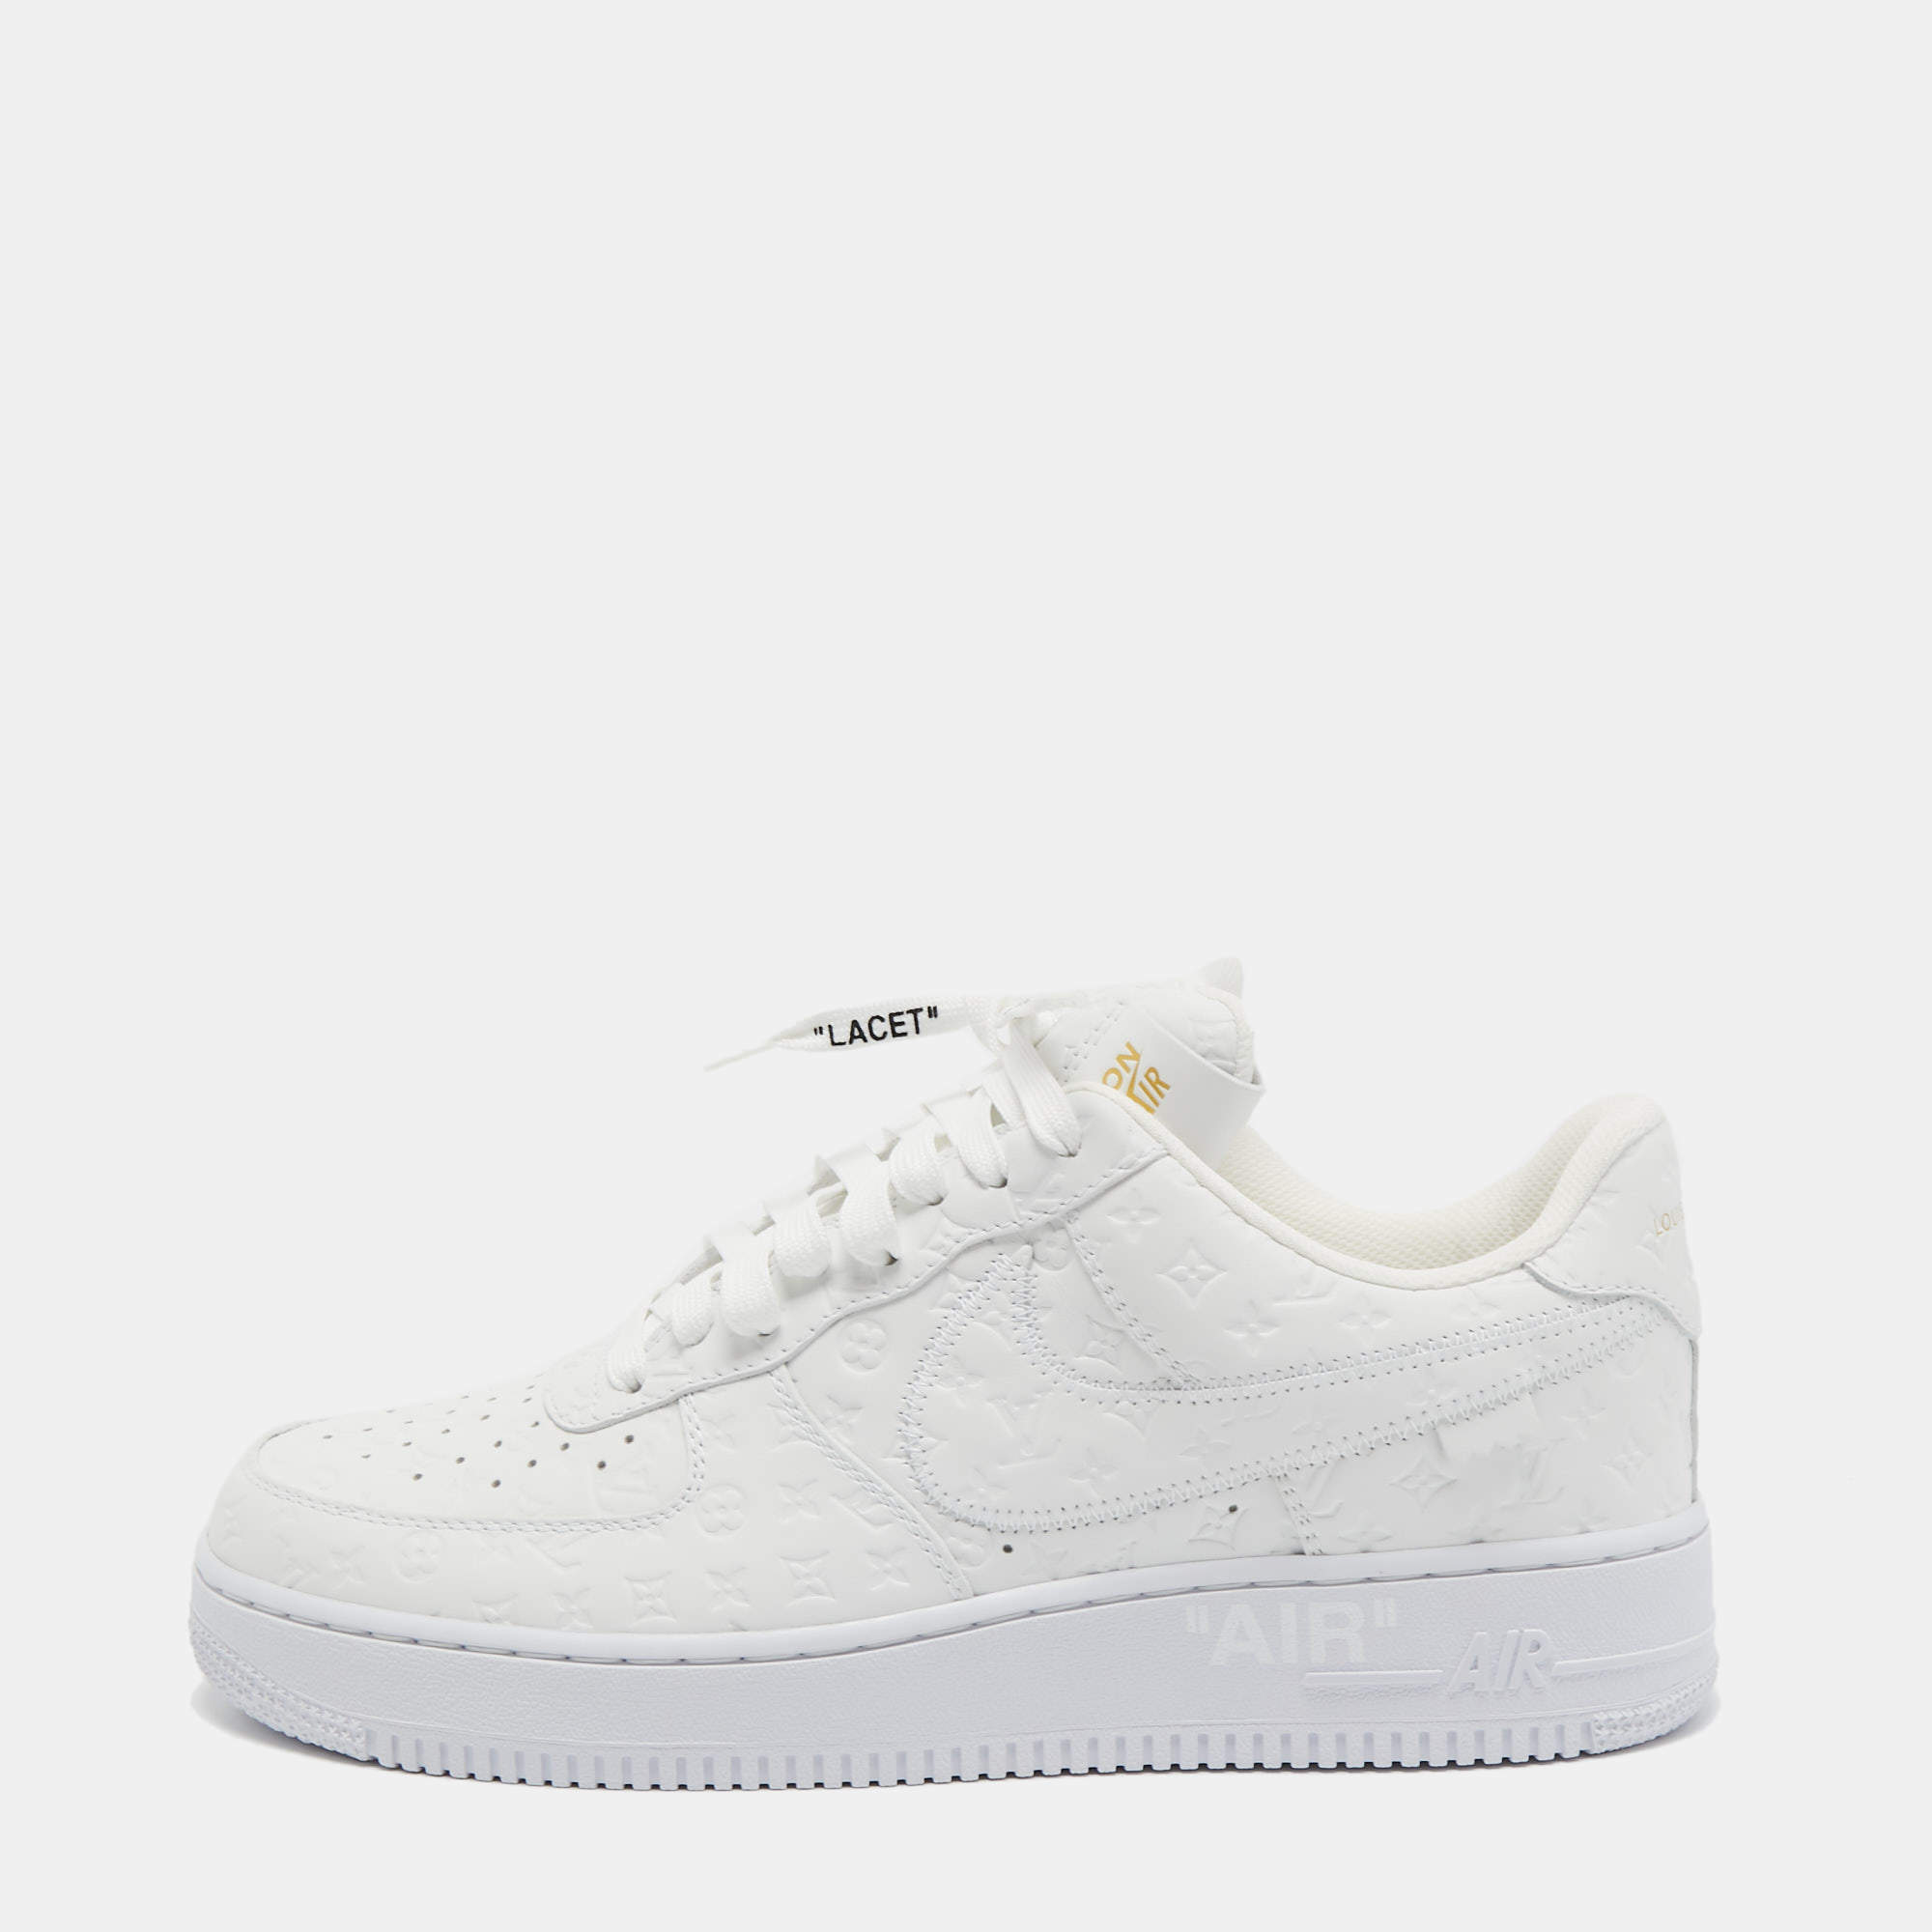 Louis Vuitton/Air Force White Leather Low Top Sneakers Size 43 Louis ...